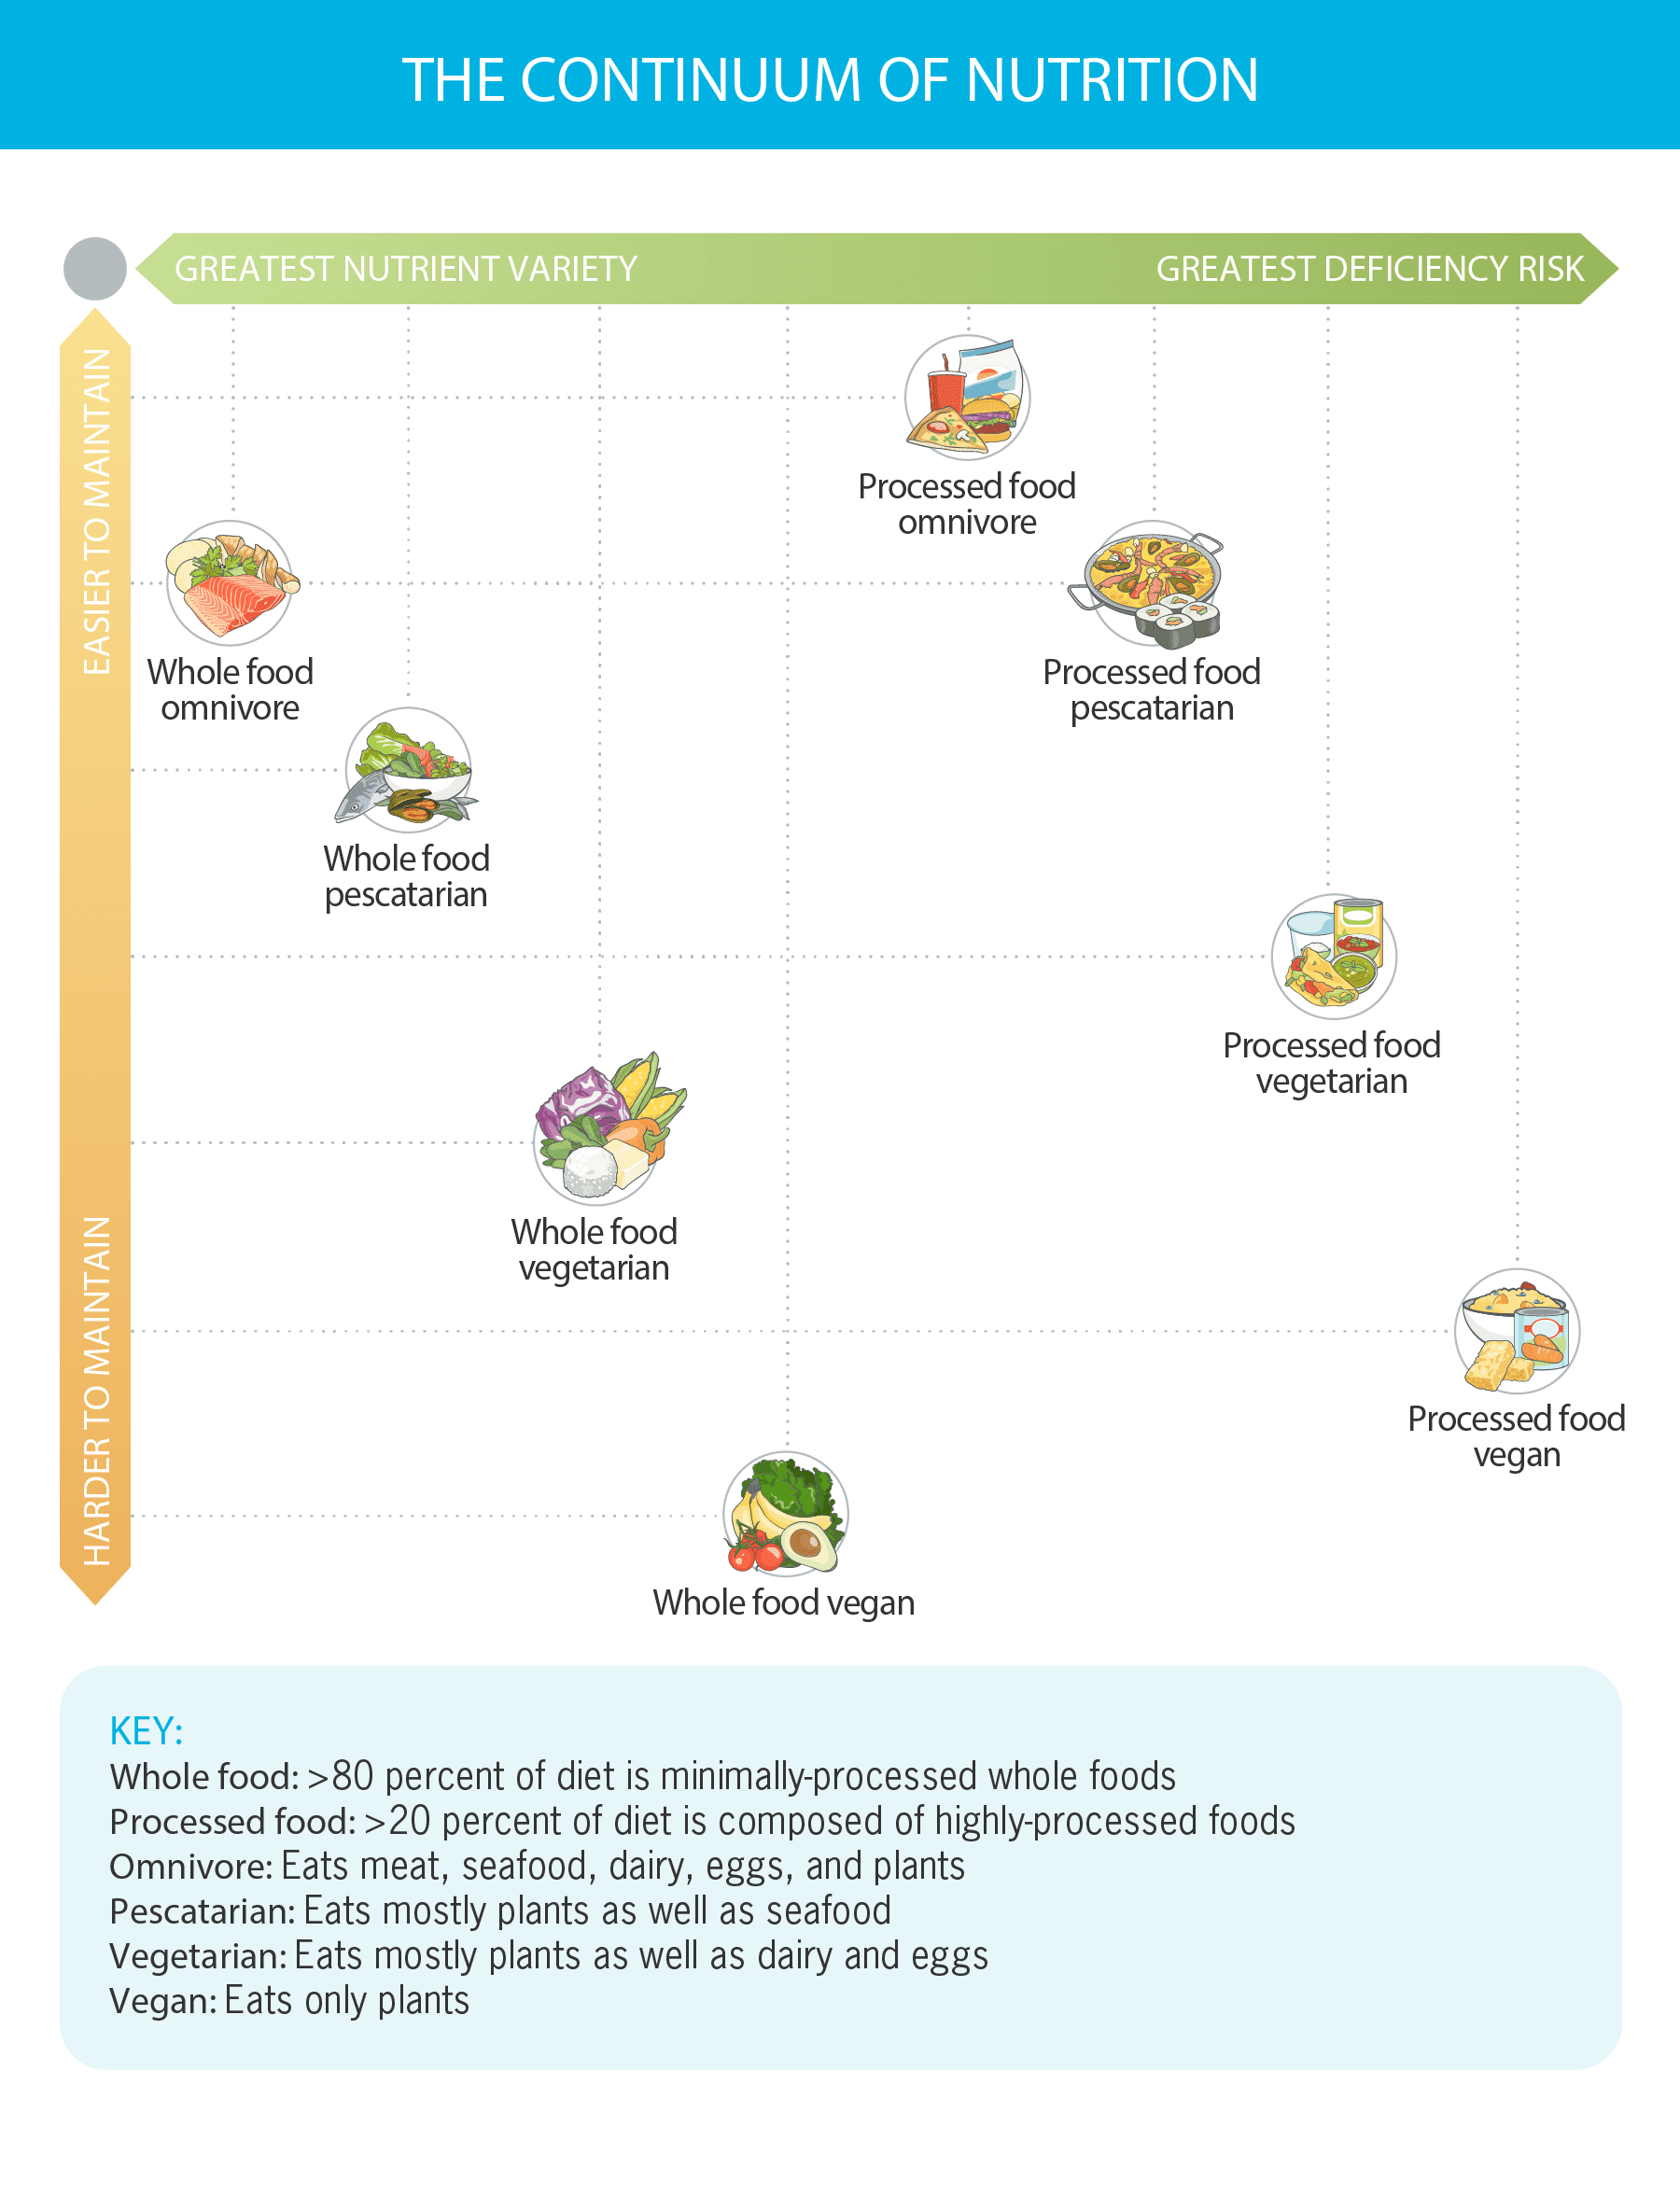 This chart is titled “The Continuum of Nutrition.” At the top of the chart is a horizontal green bar: On the left end it reads, “Greatest Nutrient Variety”; on the right end, it reads, “Greatest Deficiency Risk.” On the left side of the chart, there’s a vertical orange bar. On the bottom end it reads, “Harder to Maintain”; on the top end, it reads, “Easier to Maintain.” Types of eating styles are plotted based on where they fall on both continuums. “Whole food omnivore” ranks well on “easier to maintain” and “greatest nutrient variety.” “Whole food pescatarian” is a little harder than that in both categories, but still scores well overall. “Whole food vegetarian” and “whole food vegan” both move farther away on both continuums, with “whole food vegan” being the hardest to maintain and having the least nutrient variety of the aforementioned approaches. However, all of these approaches provide great nutrient variety than the processed food version of each approach. Those fall in the same order, but are each at progressively greater risk of nutrient deficiency. 